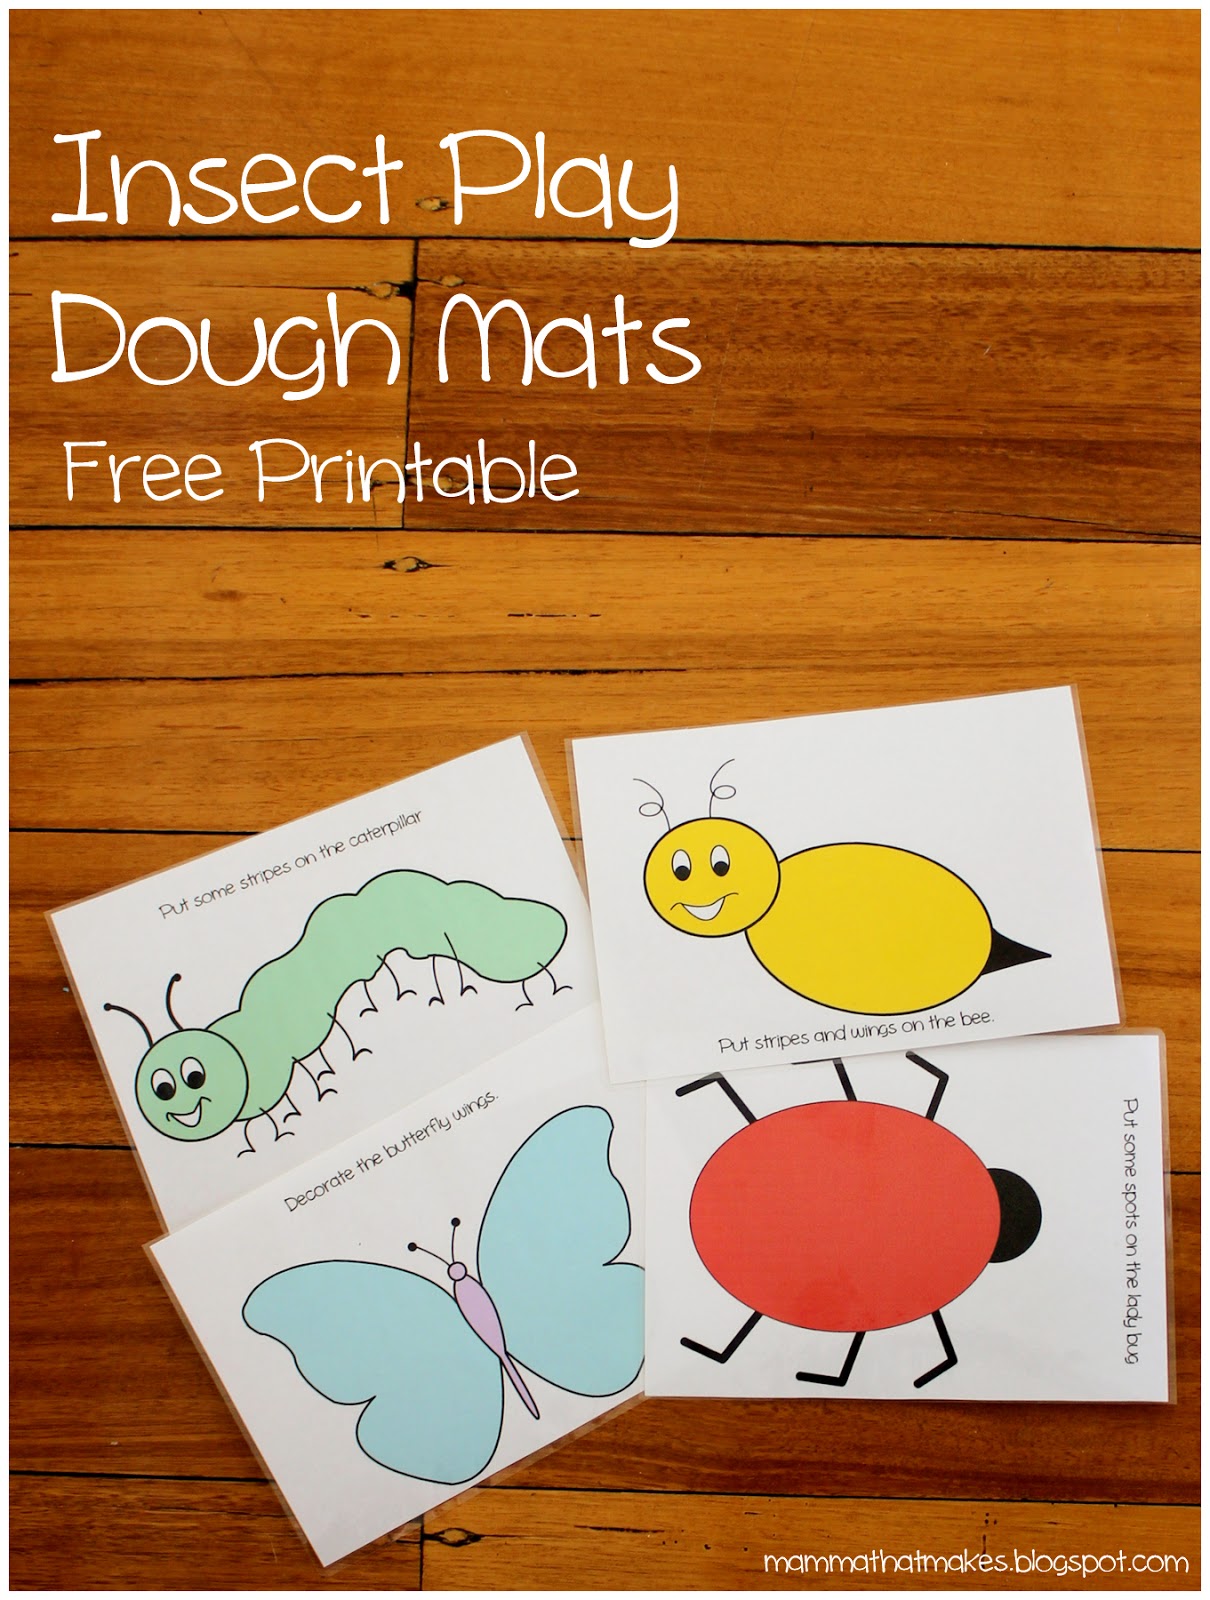 mamma-that-makes-insect-play-dough-mats